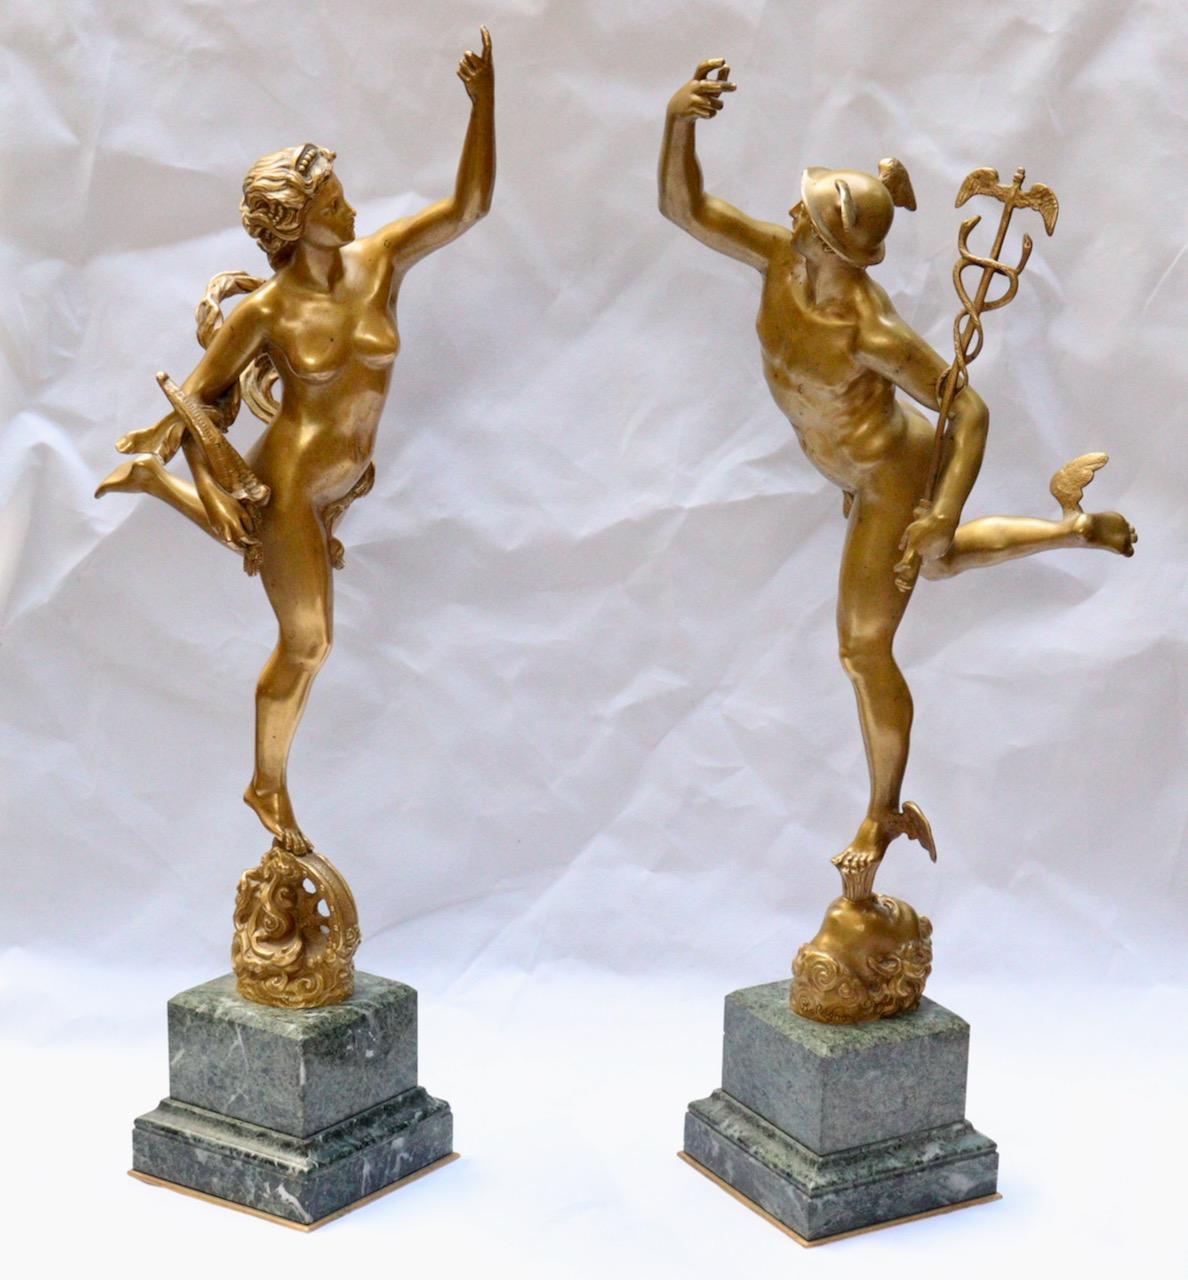 Neoclassical Mercury & Fortuna, A 19th Century Pair of Bronze Sculptures After Giambologna